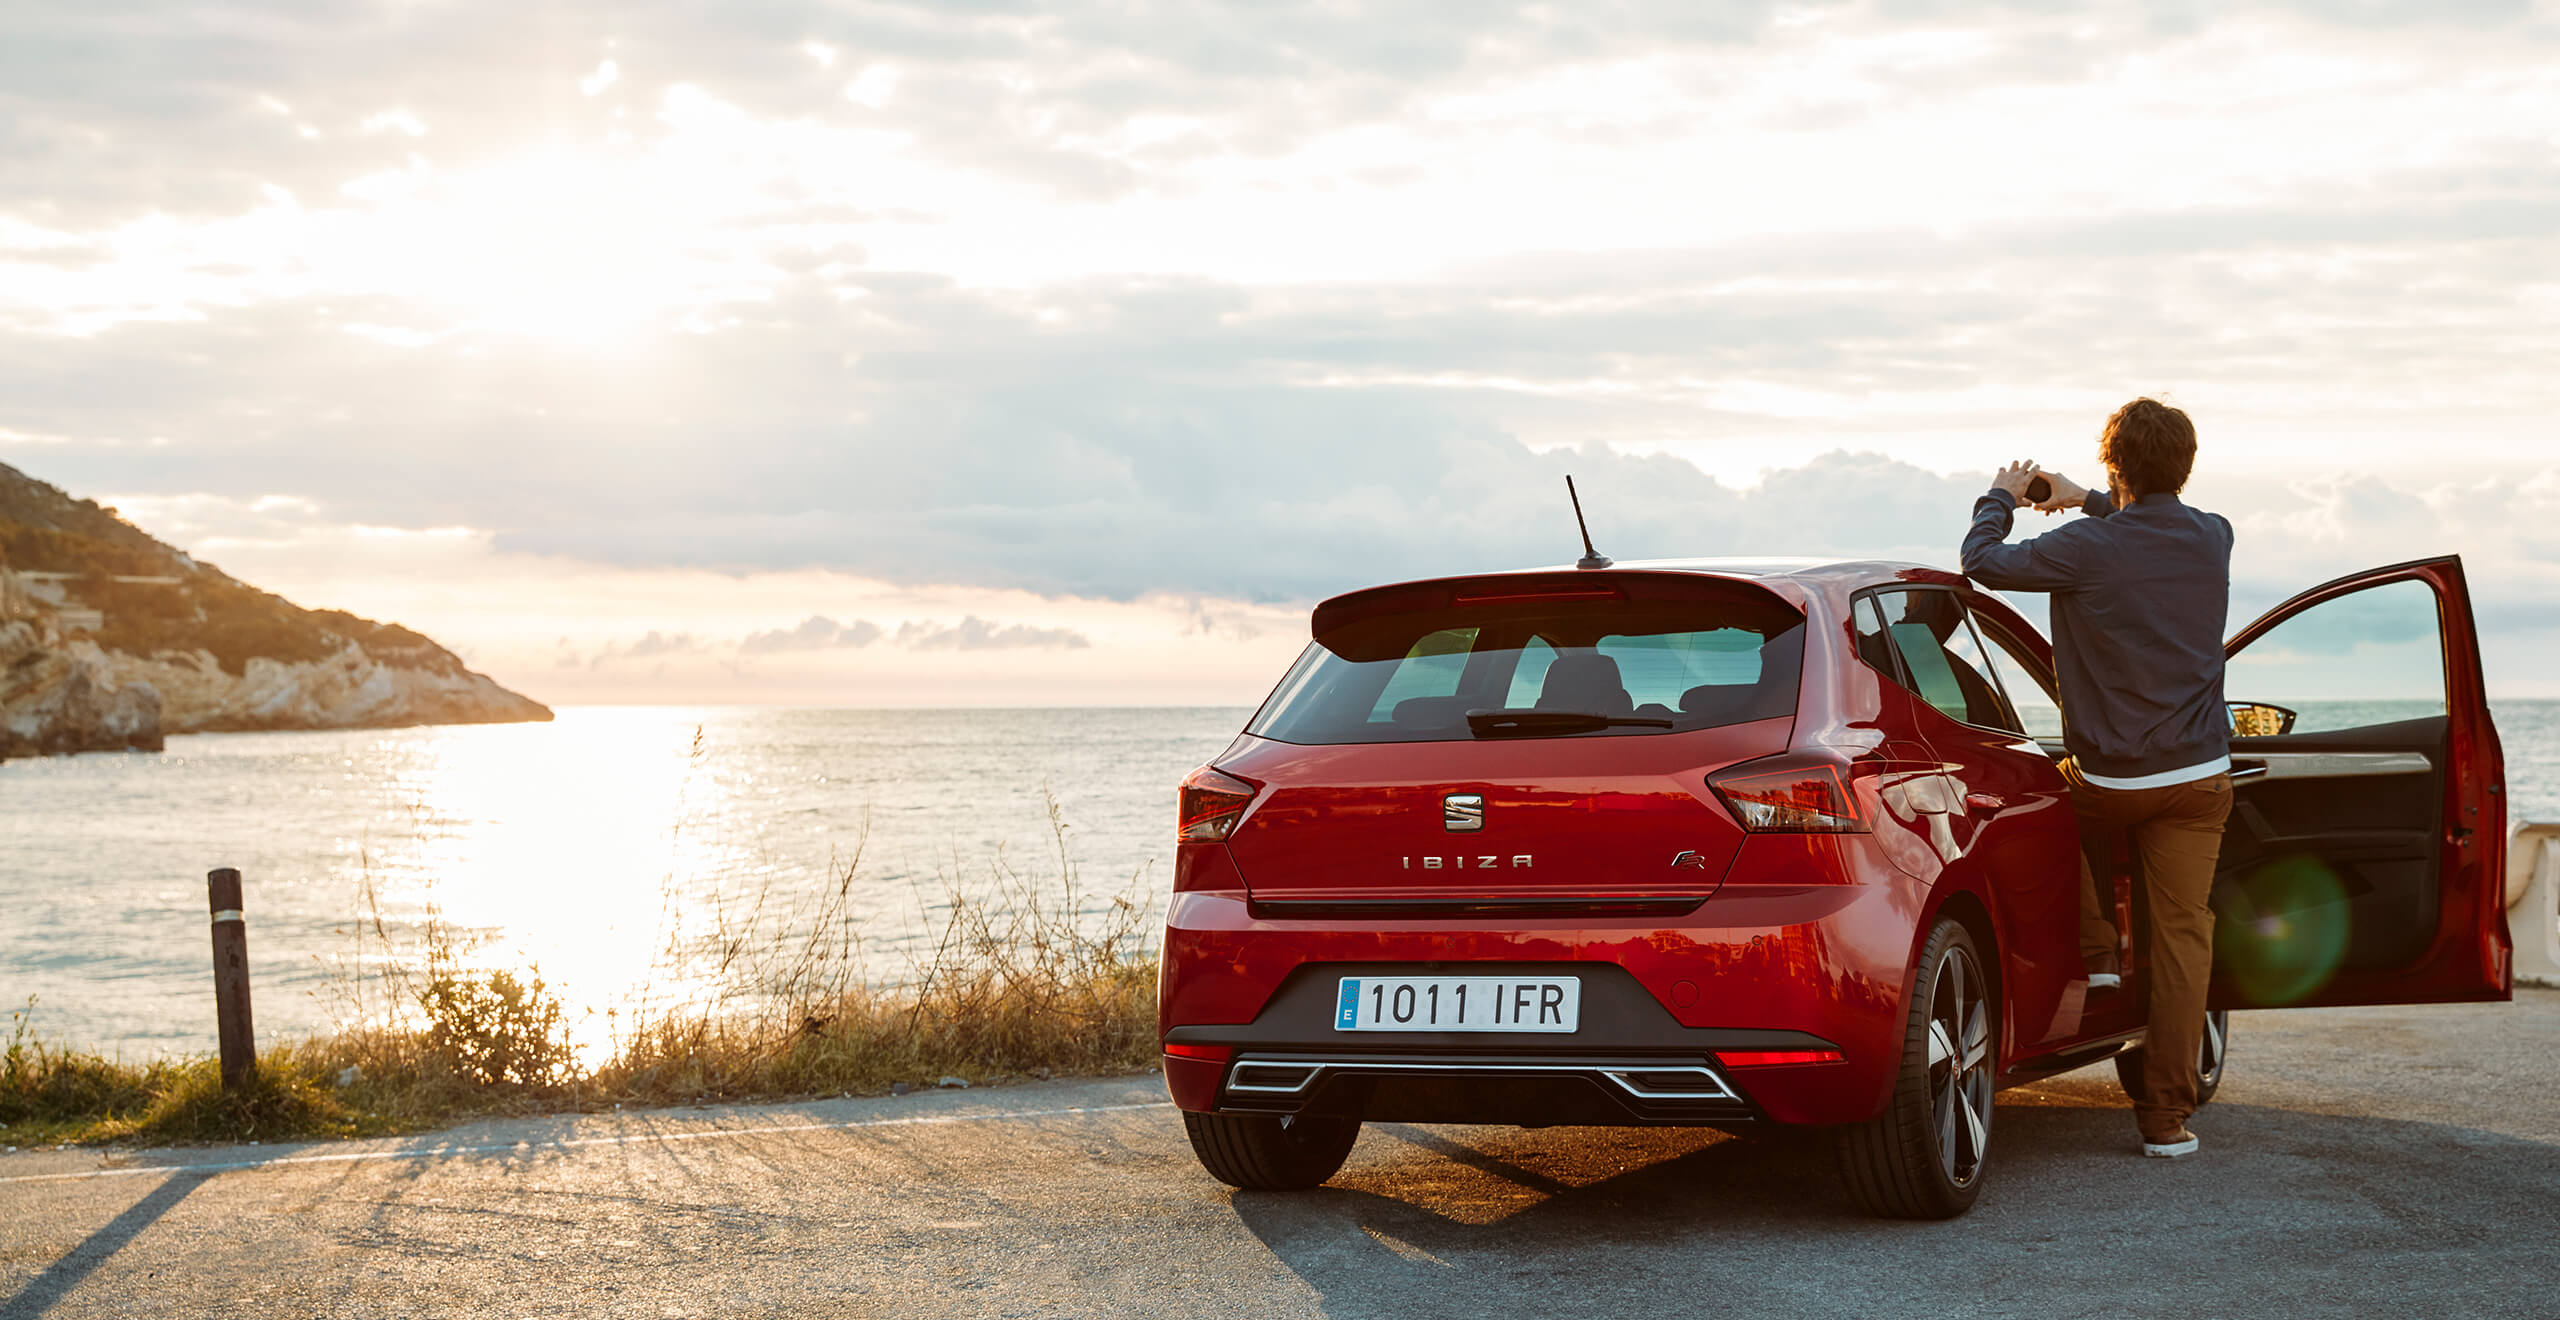 SEAT new car services roadside assistance maintenance – SEAT Ibiza city car hatchback overlooking the sea with a man taking a photograph